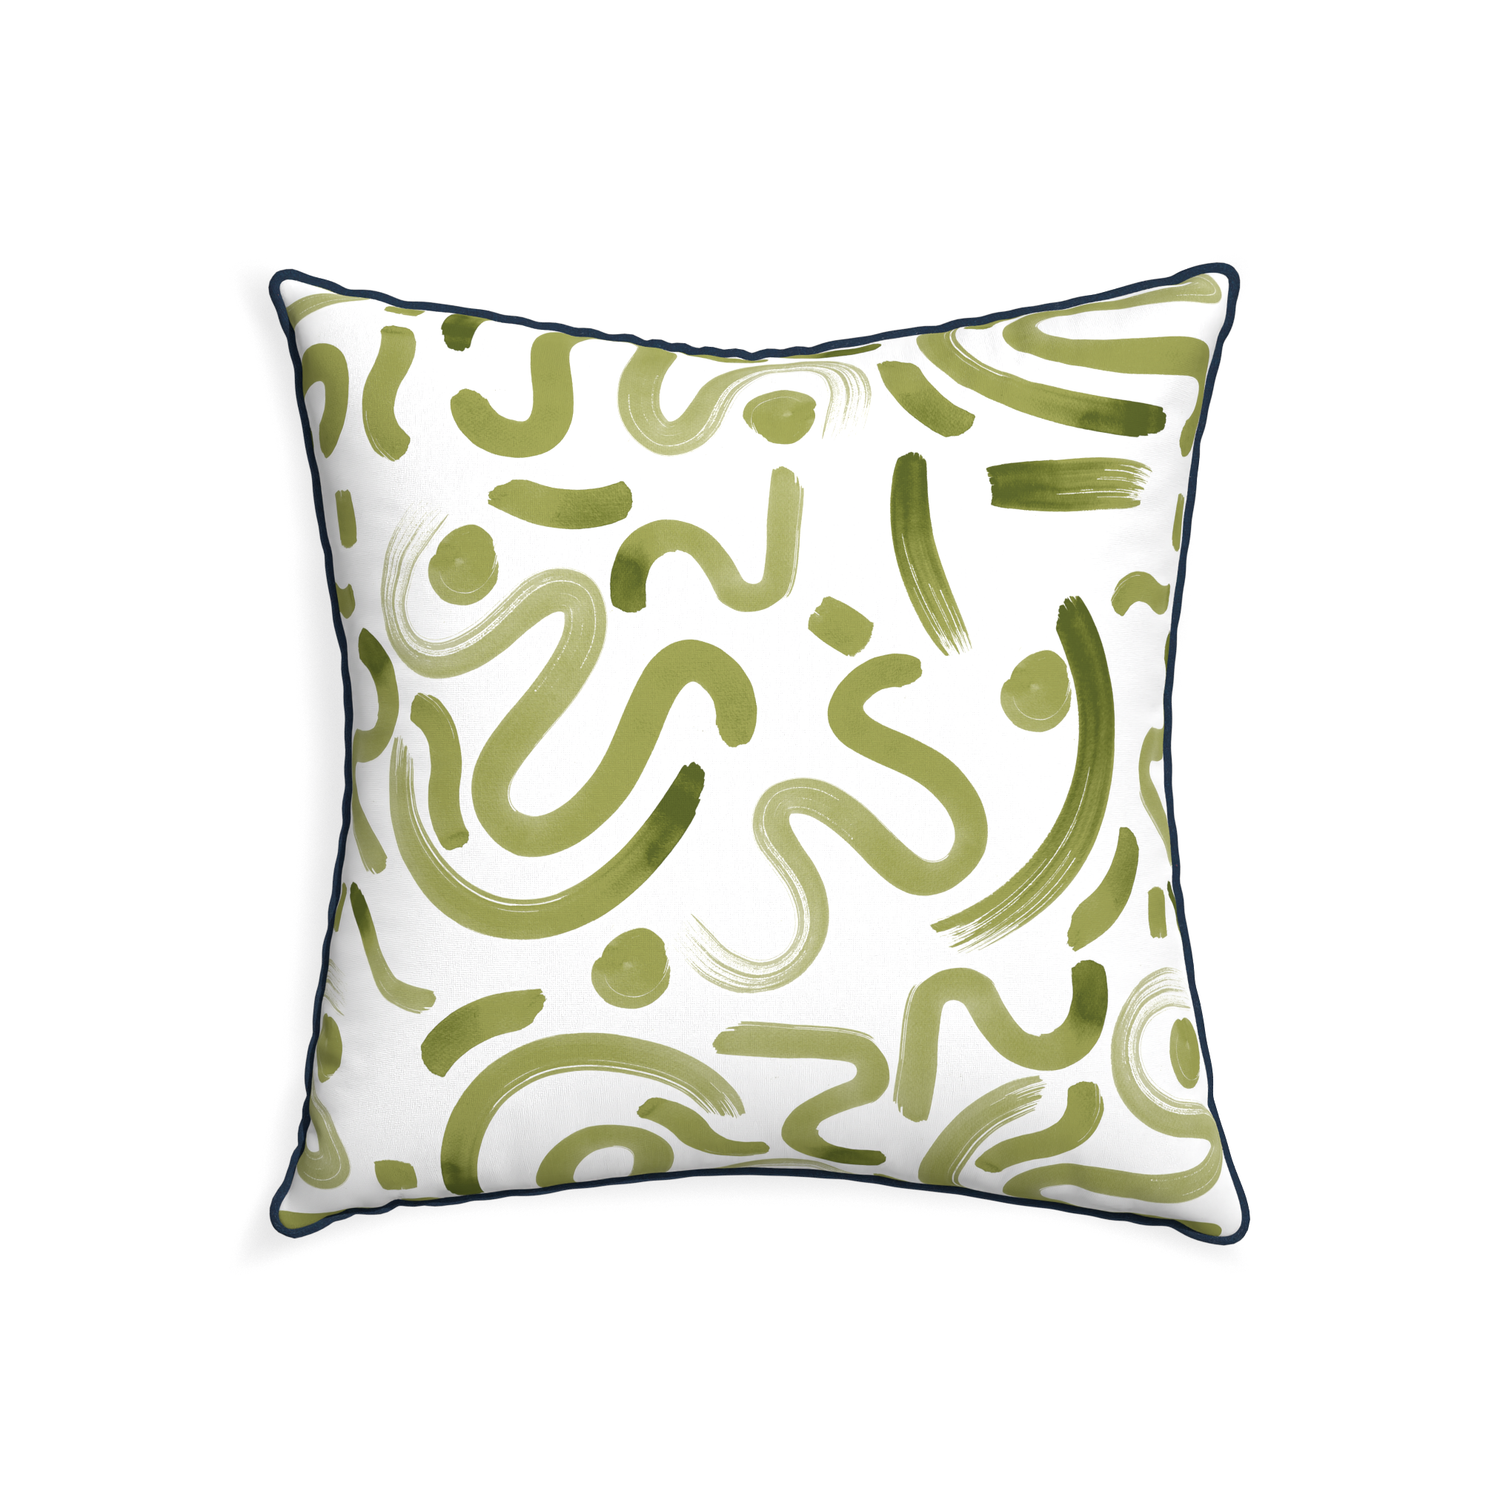 22-square hockney moss custom moss greenpillow with c piping on white background